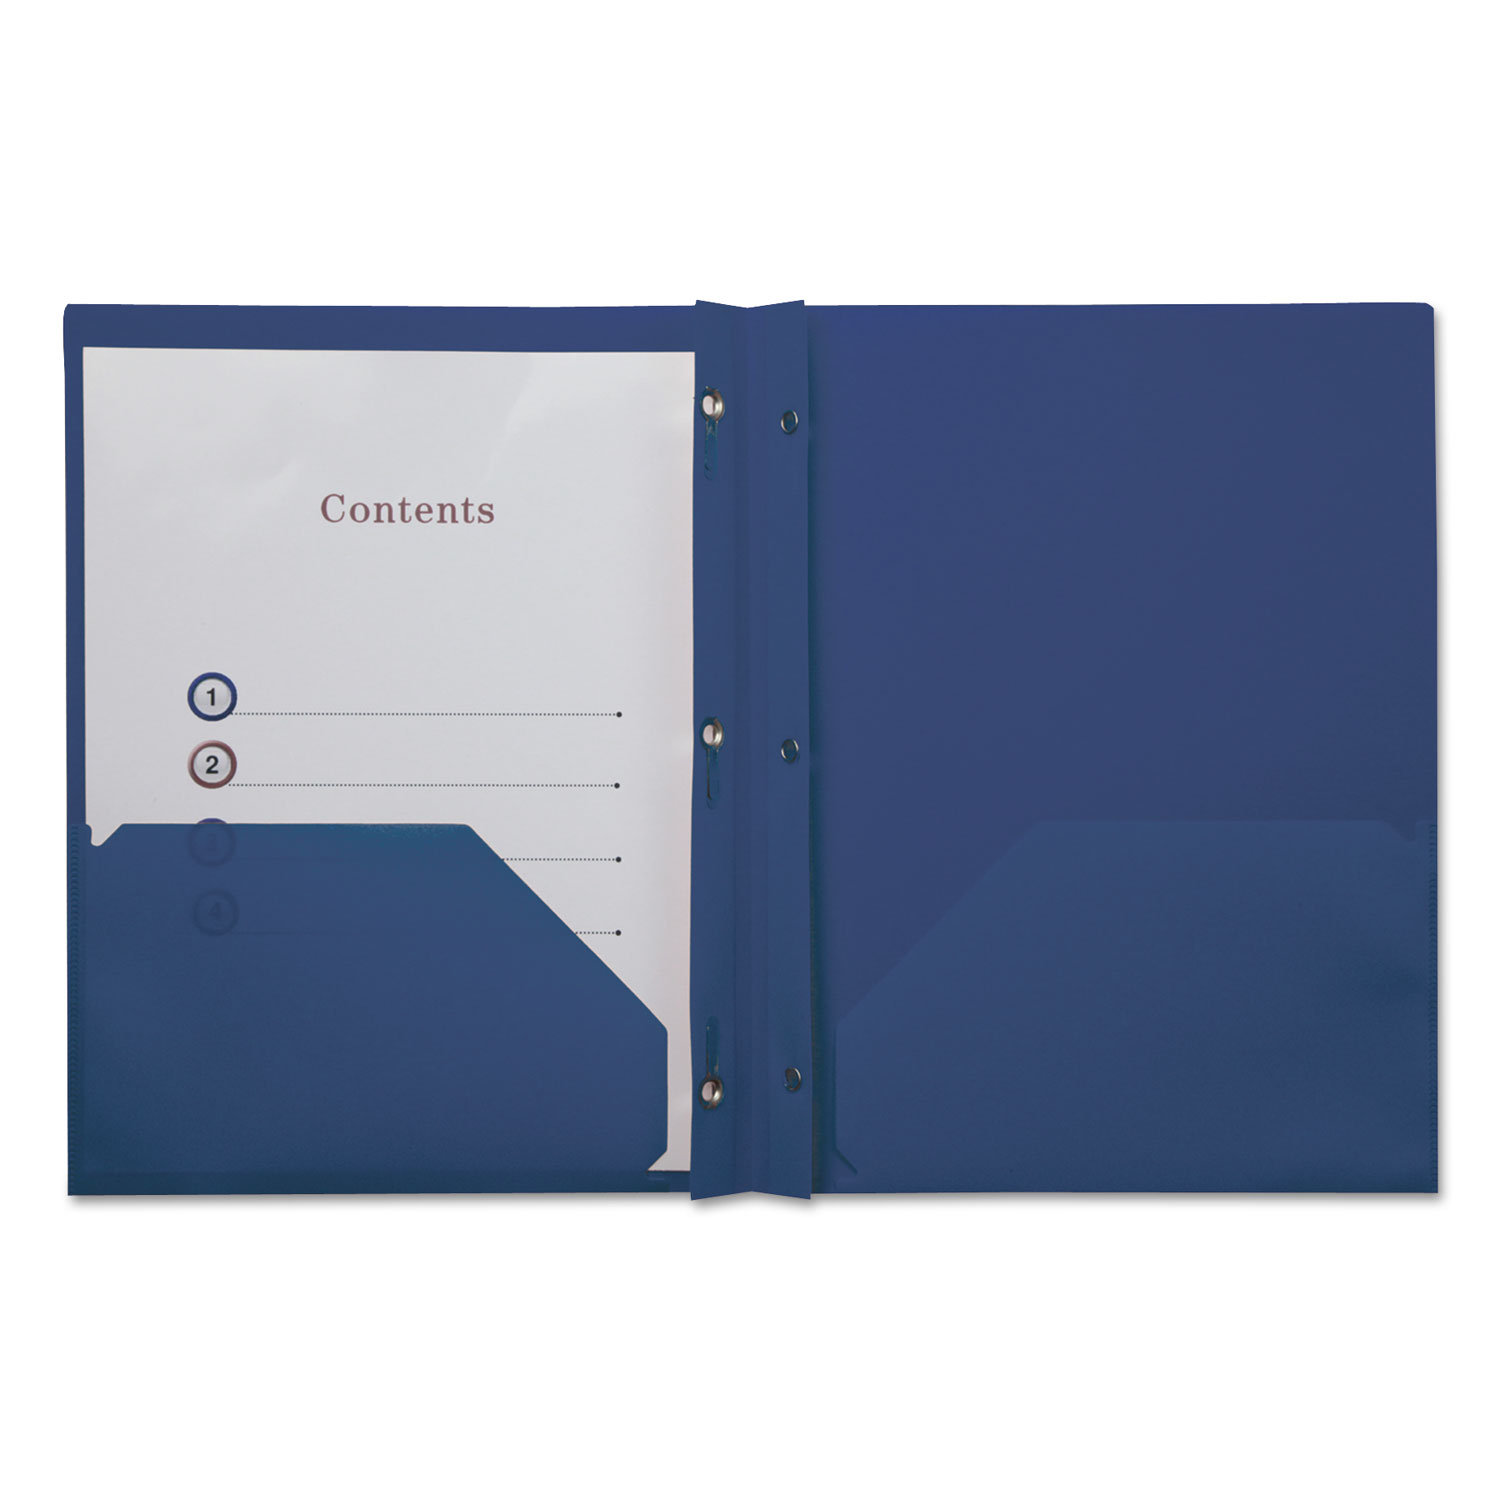  Universal UNV20552 Plastic Twin-Pocket Report Covers with 3 Fasteners, 100 Sheets,RoyalBlue, 10/PK (UNV20552) 